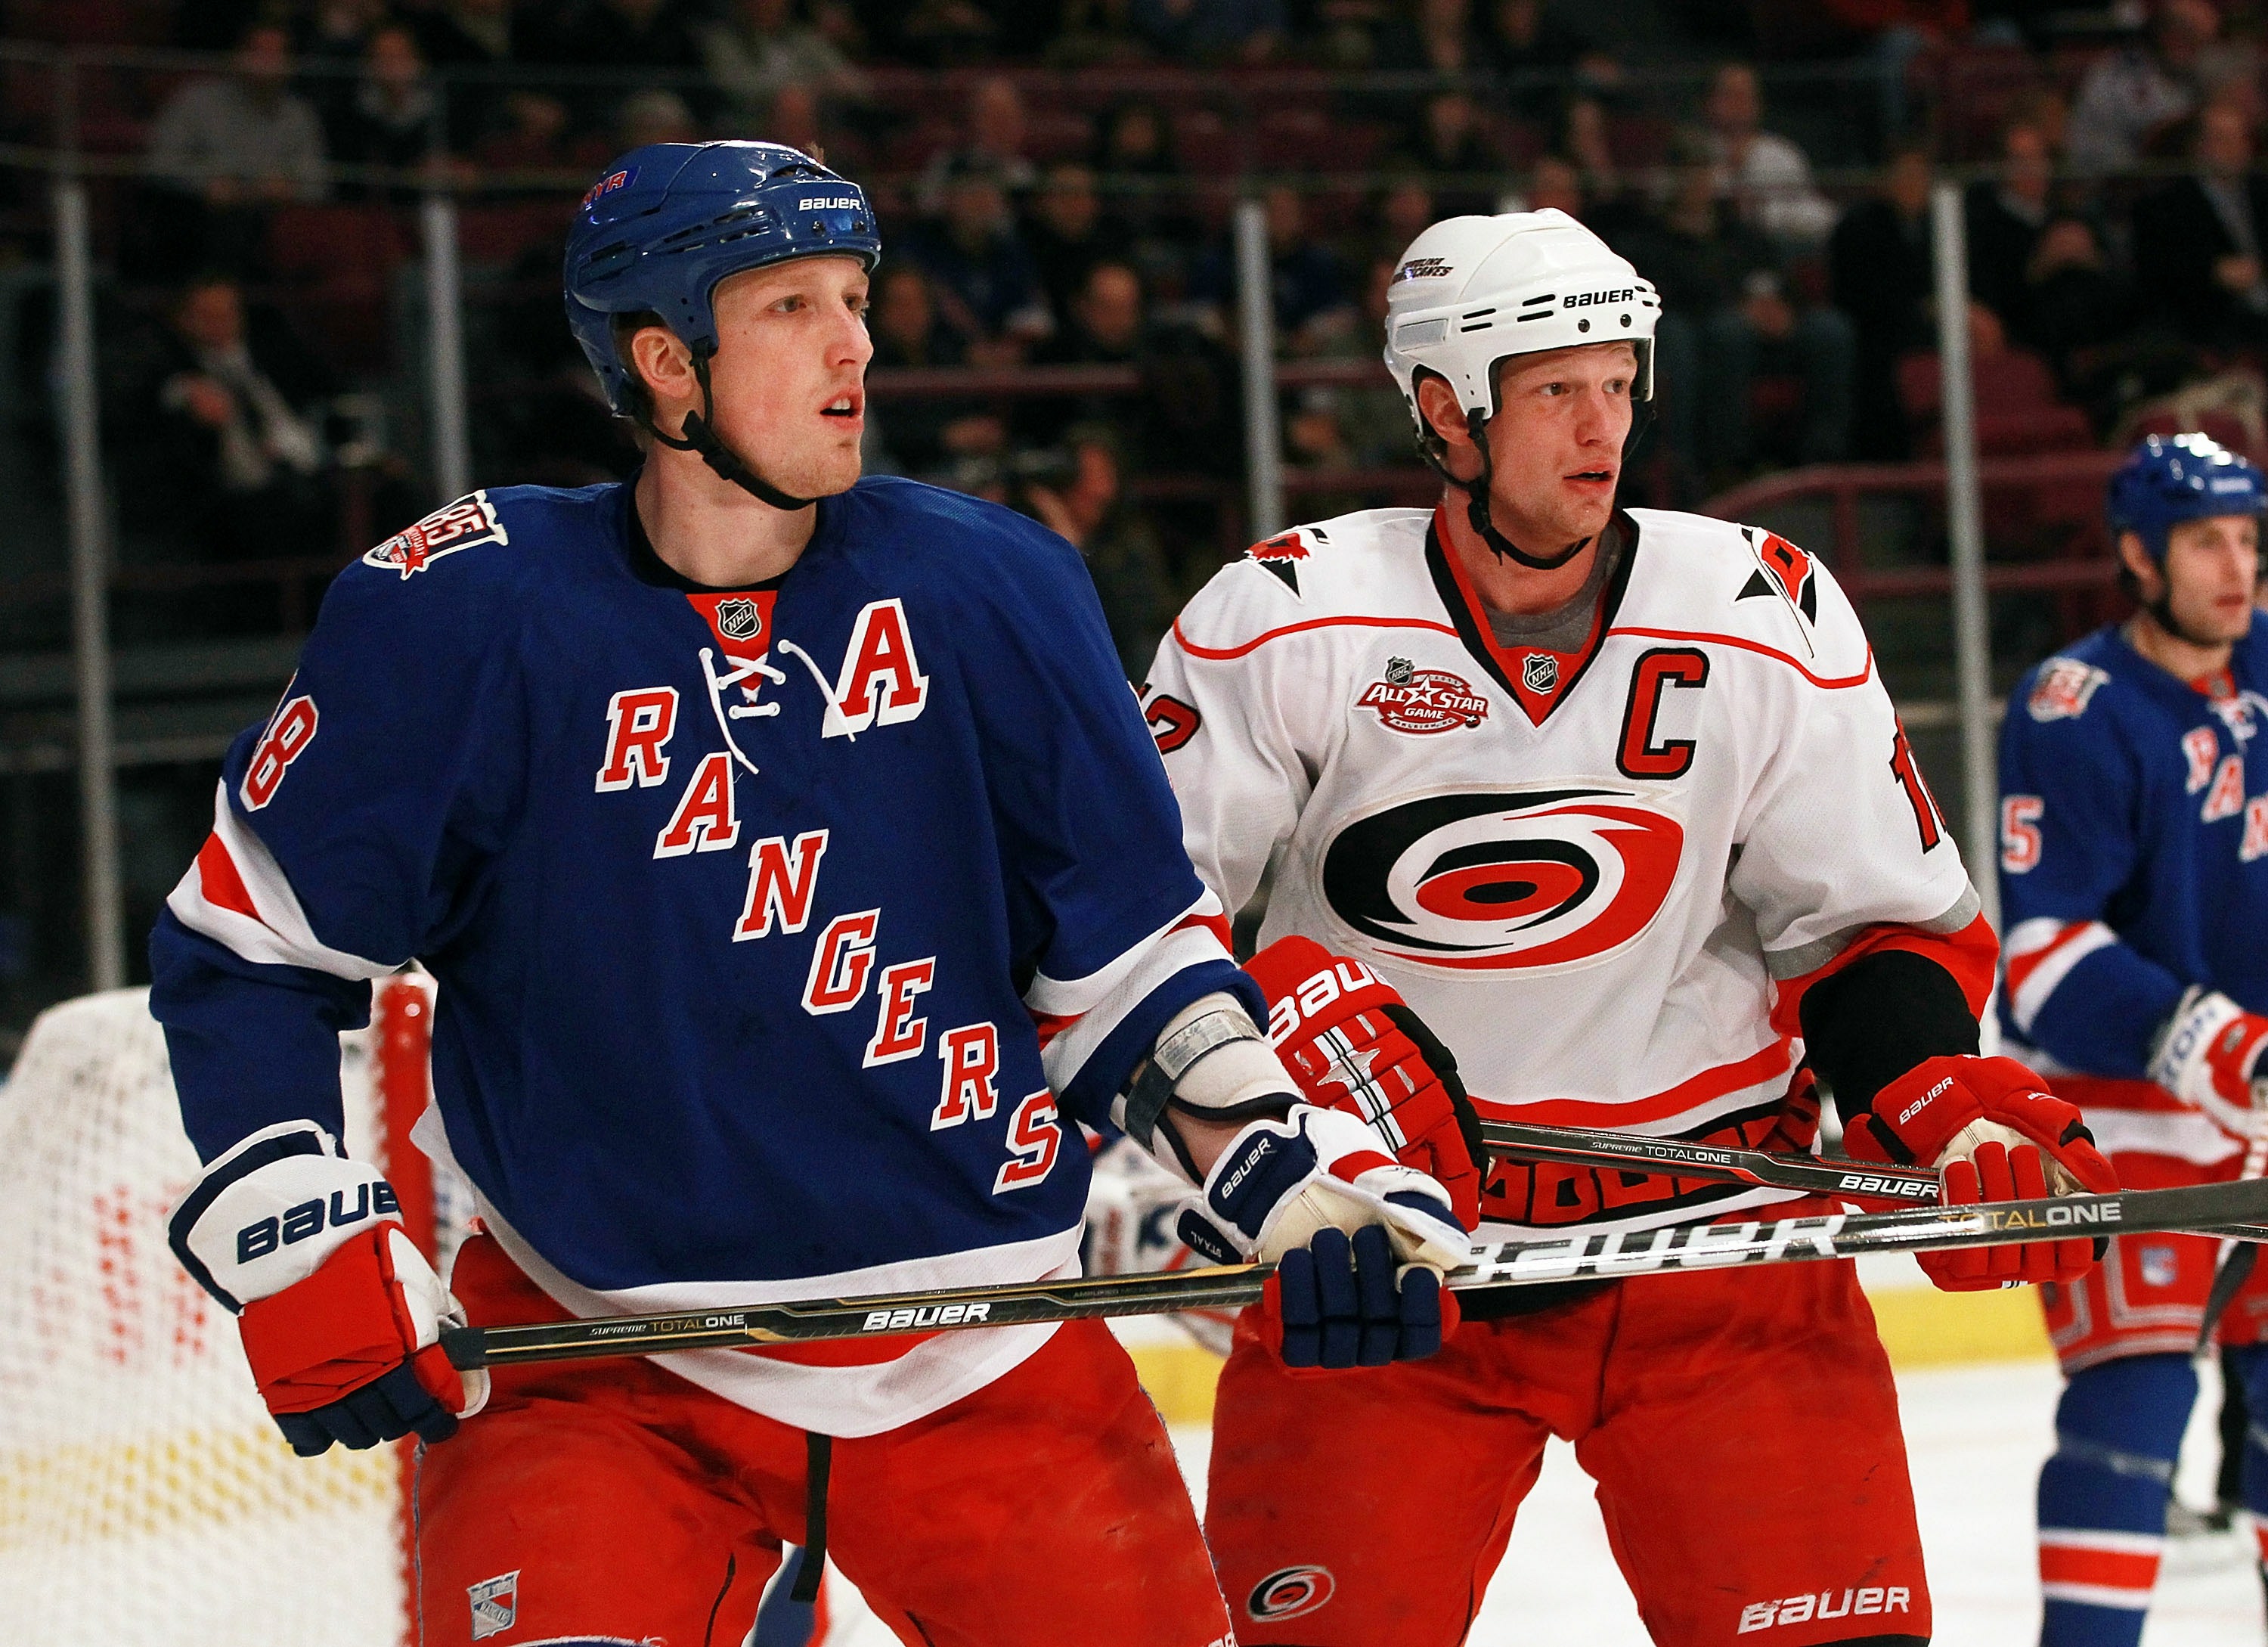 Flyers sign defenseman Marc Staal to a 1-year deal while the Leafs add Max  Domi - NBC Sports